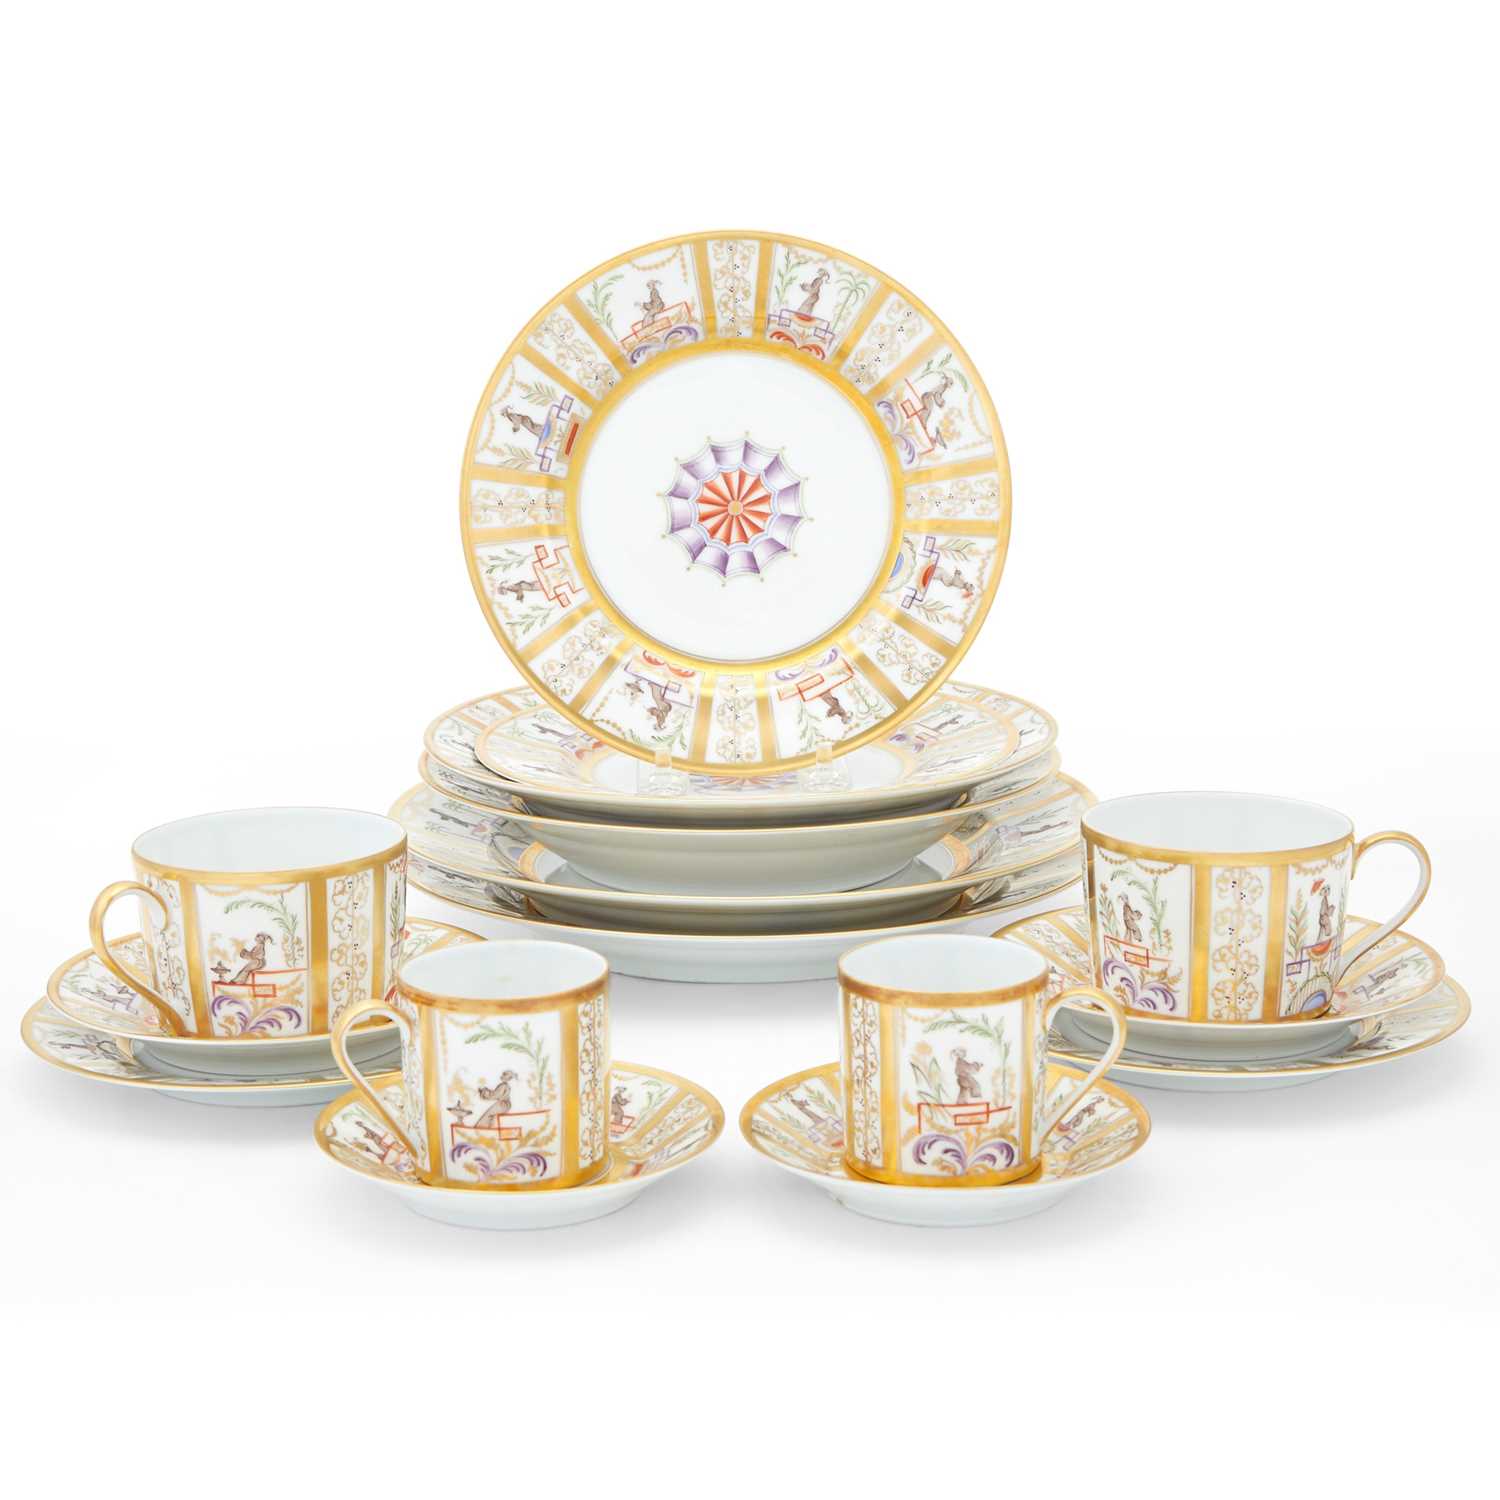 Lot 333 - Tiffany & Co. for Le Tallec Porcelain Carousel Chinois Pattern Dinner Service